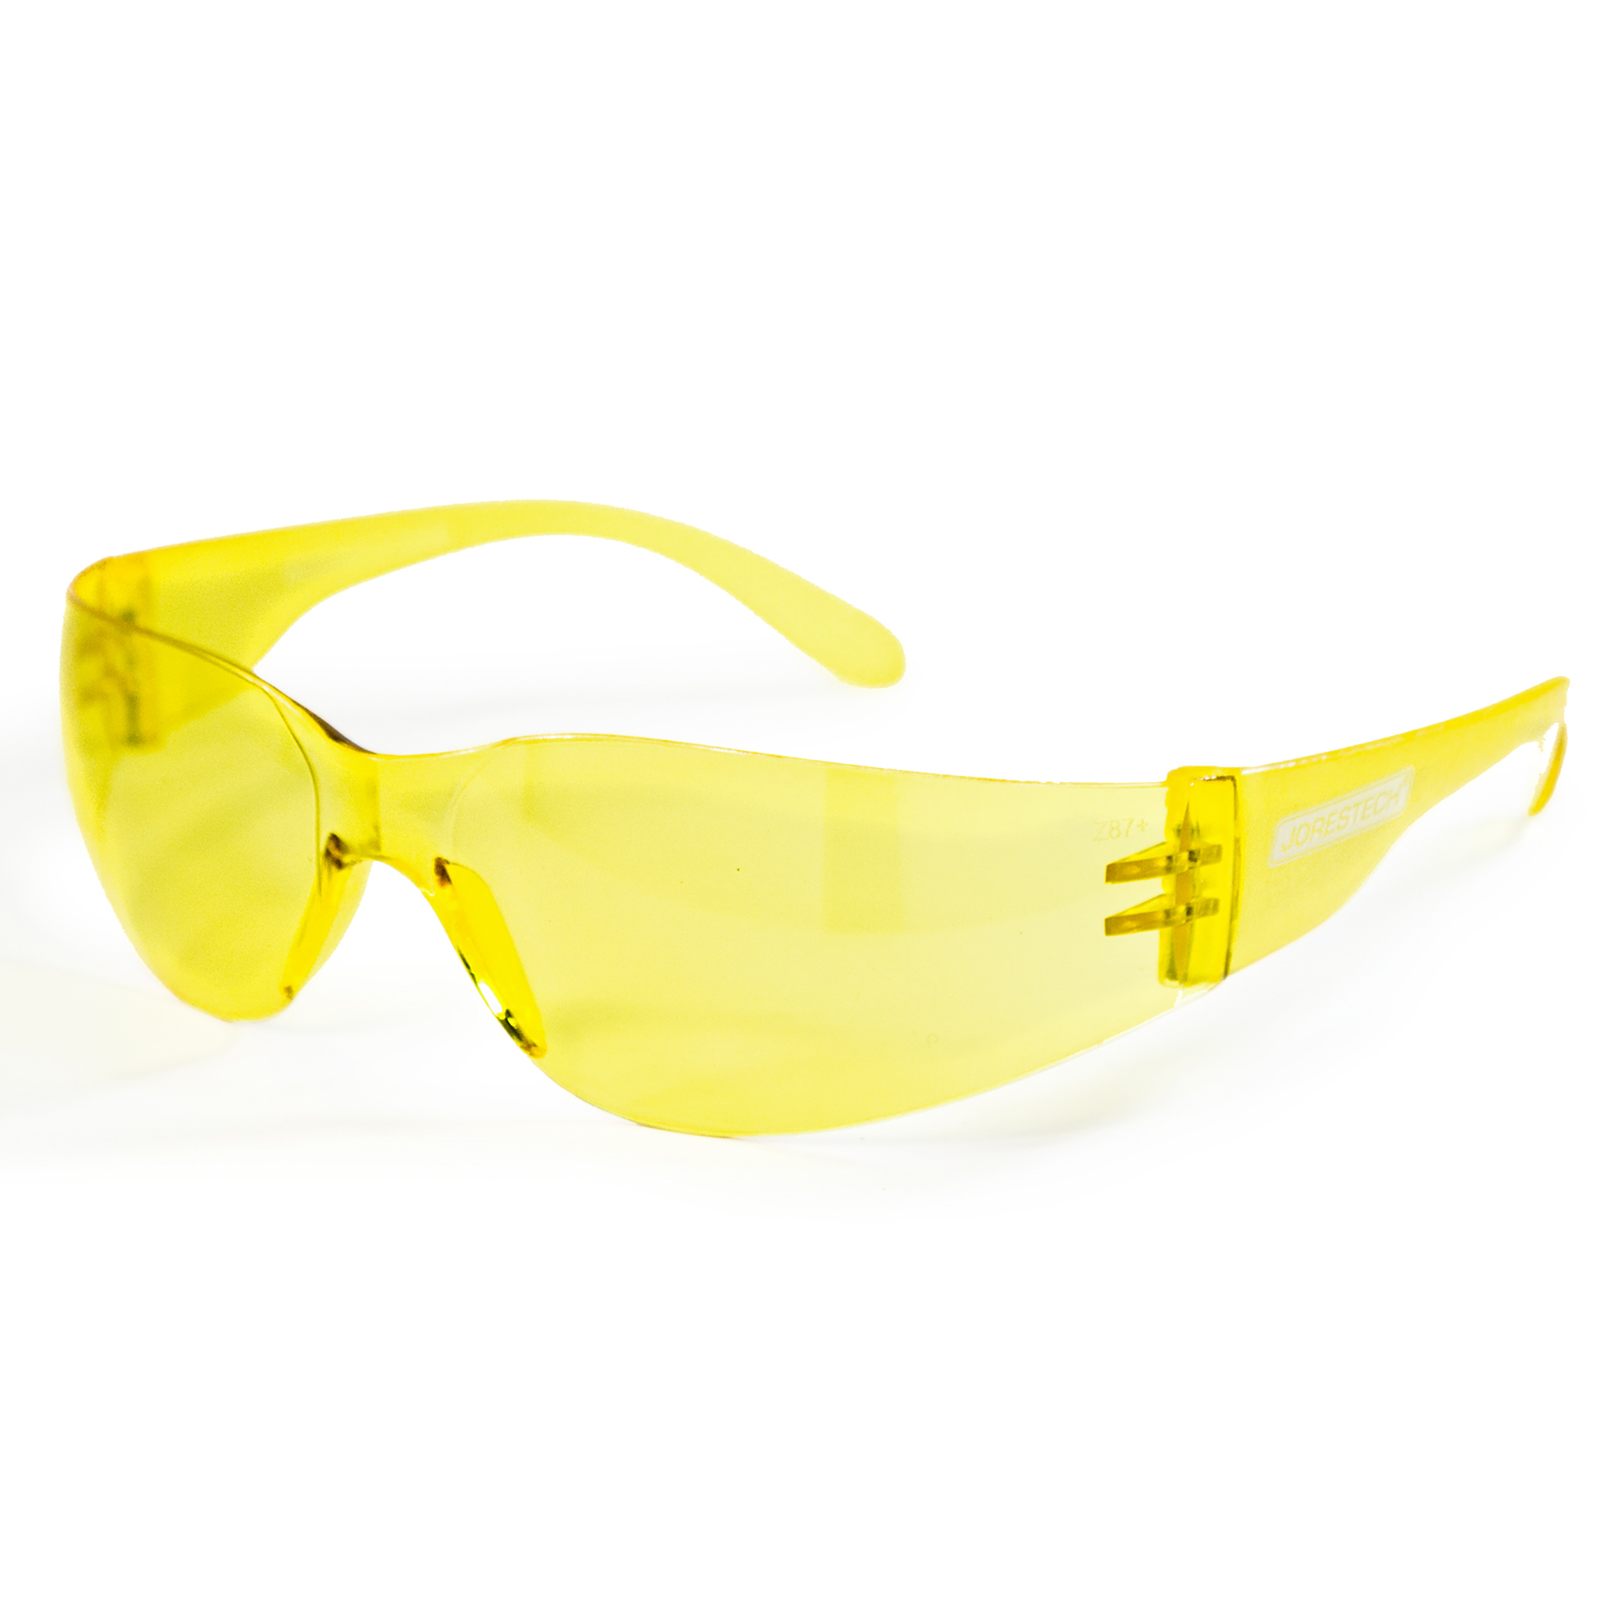 1 yellow JORESTECH Safety High Impact polycarbonate glasses over white background